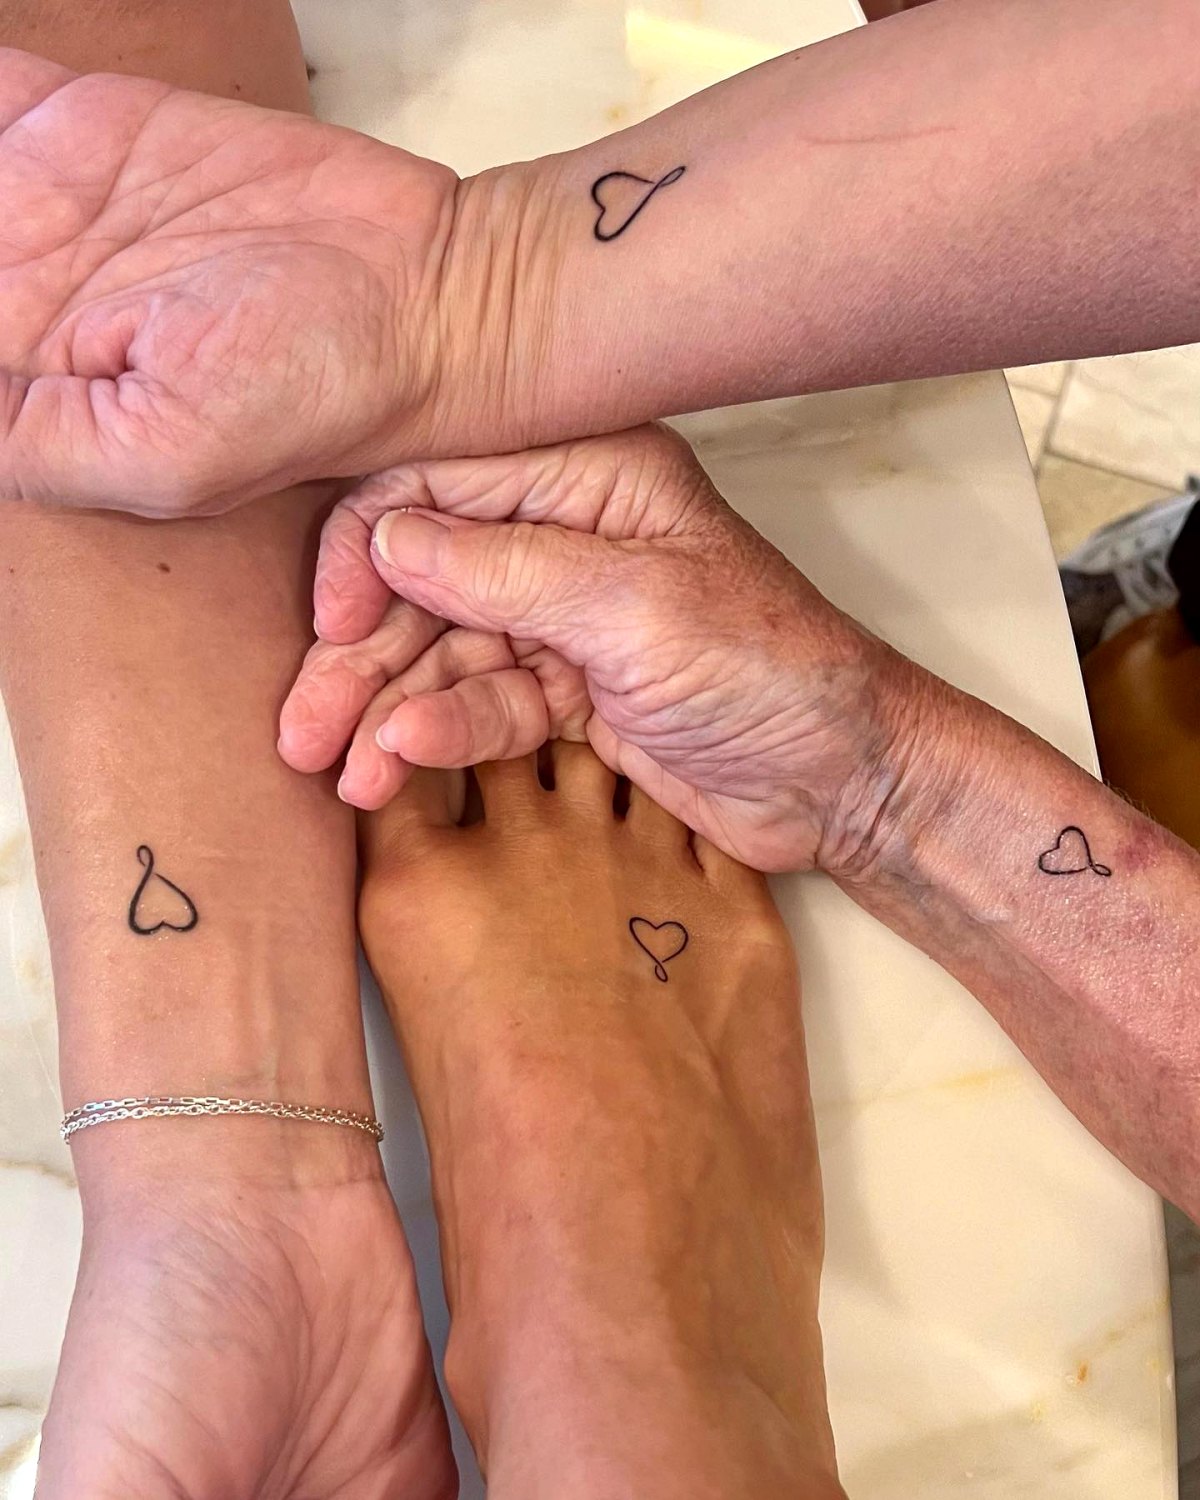 Carrie Underwood Gets Matching Tattoos With Her Mom + Sisters